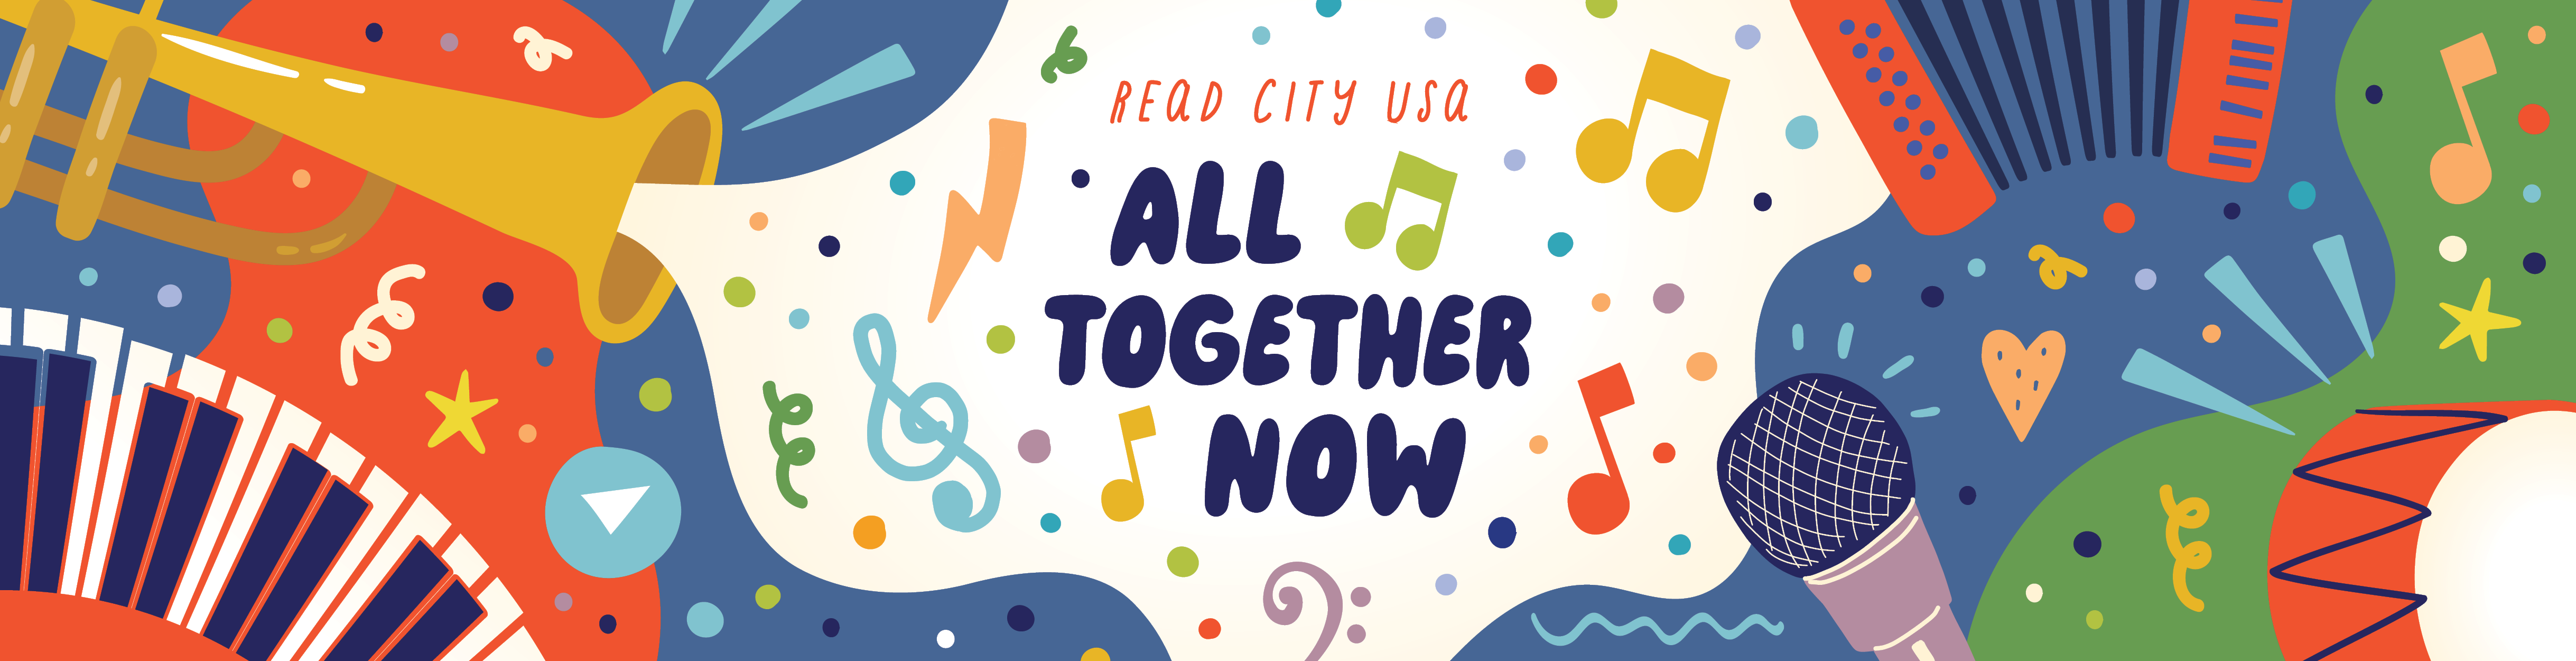 Read City USA All Together Now with images of a trumpet, accordion, drum, microphone, piano and musical notes and symbols